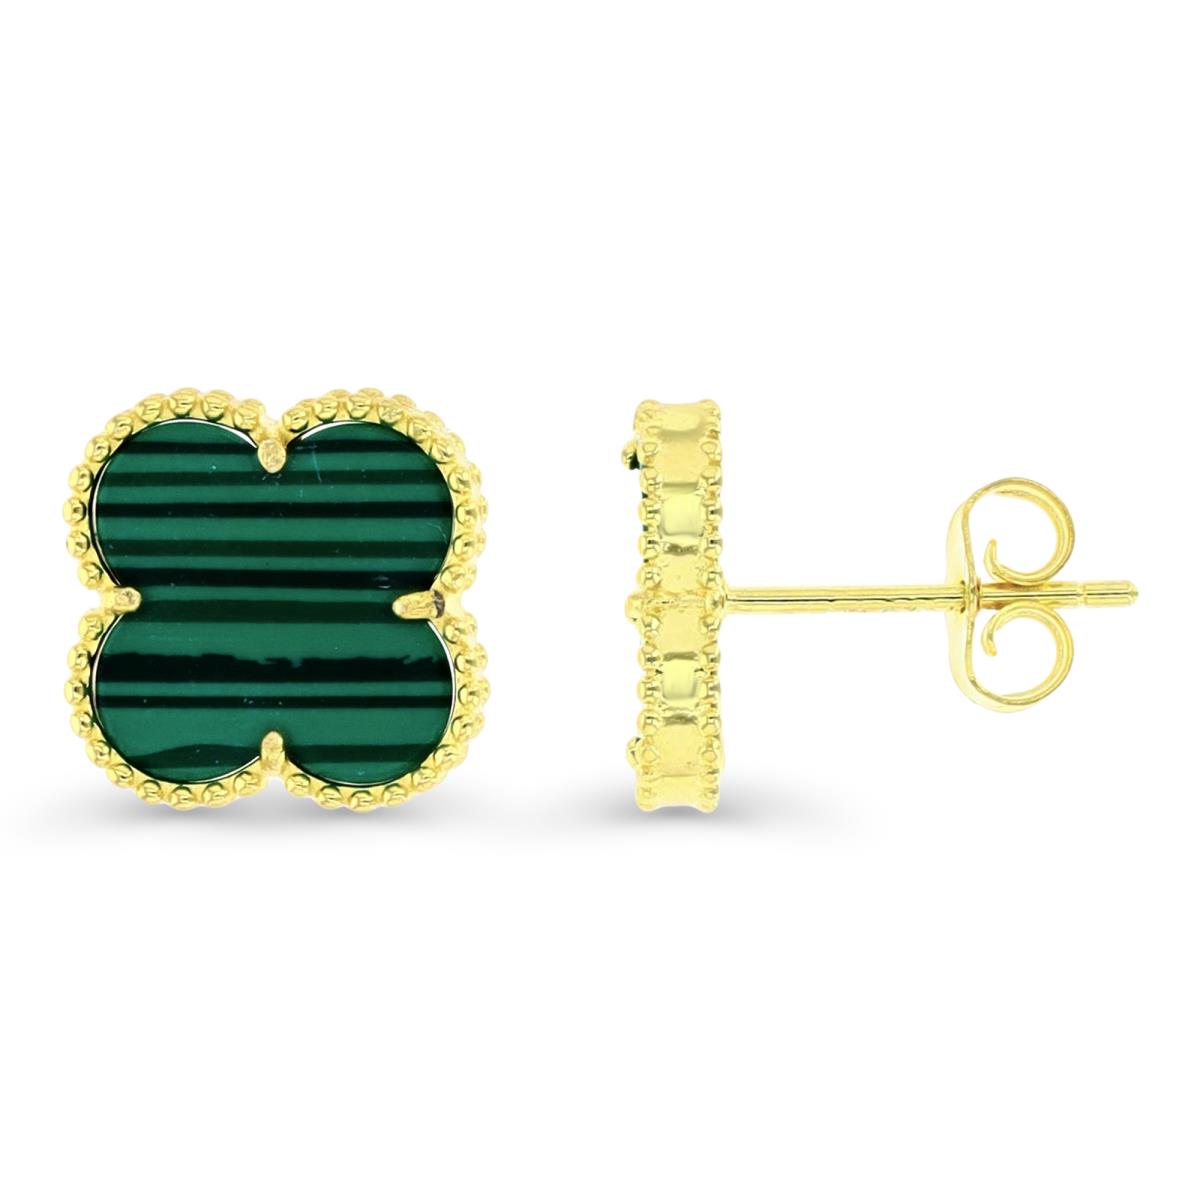 Sterling Silver Yellow 1M & Simulated Malachite 13.5MM Clover Stud Earring